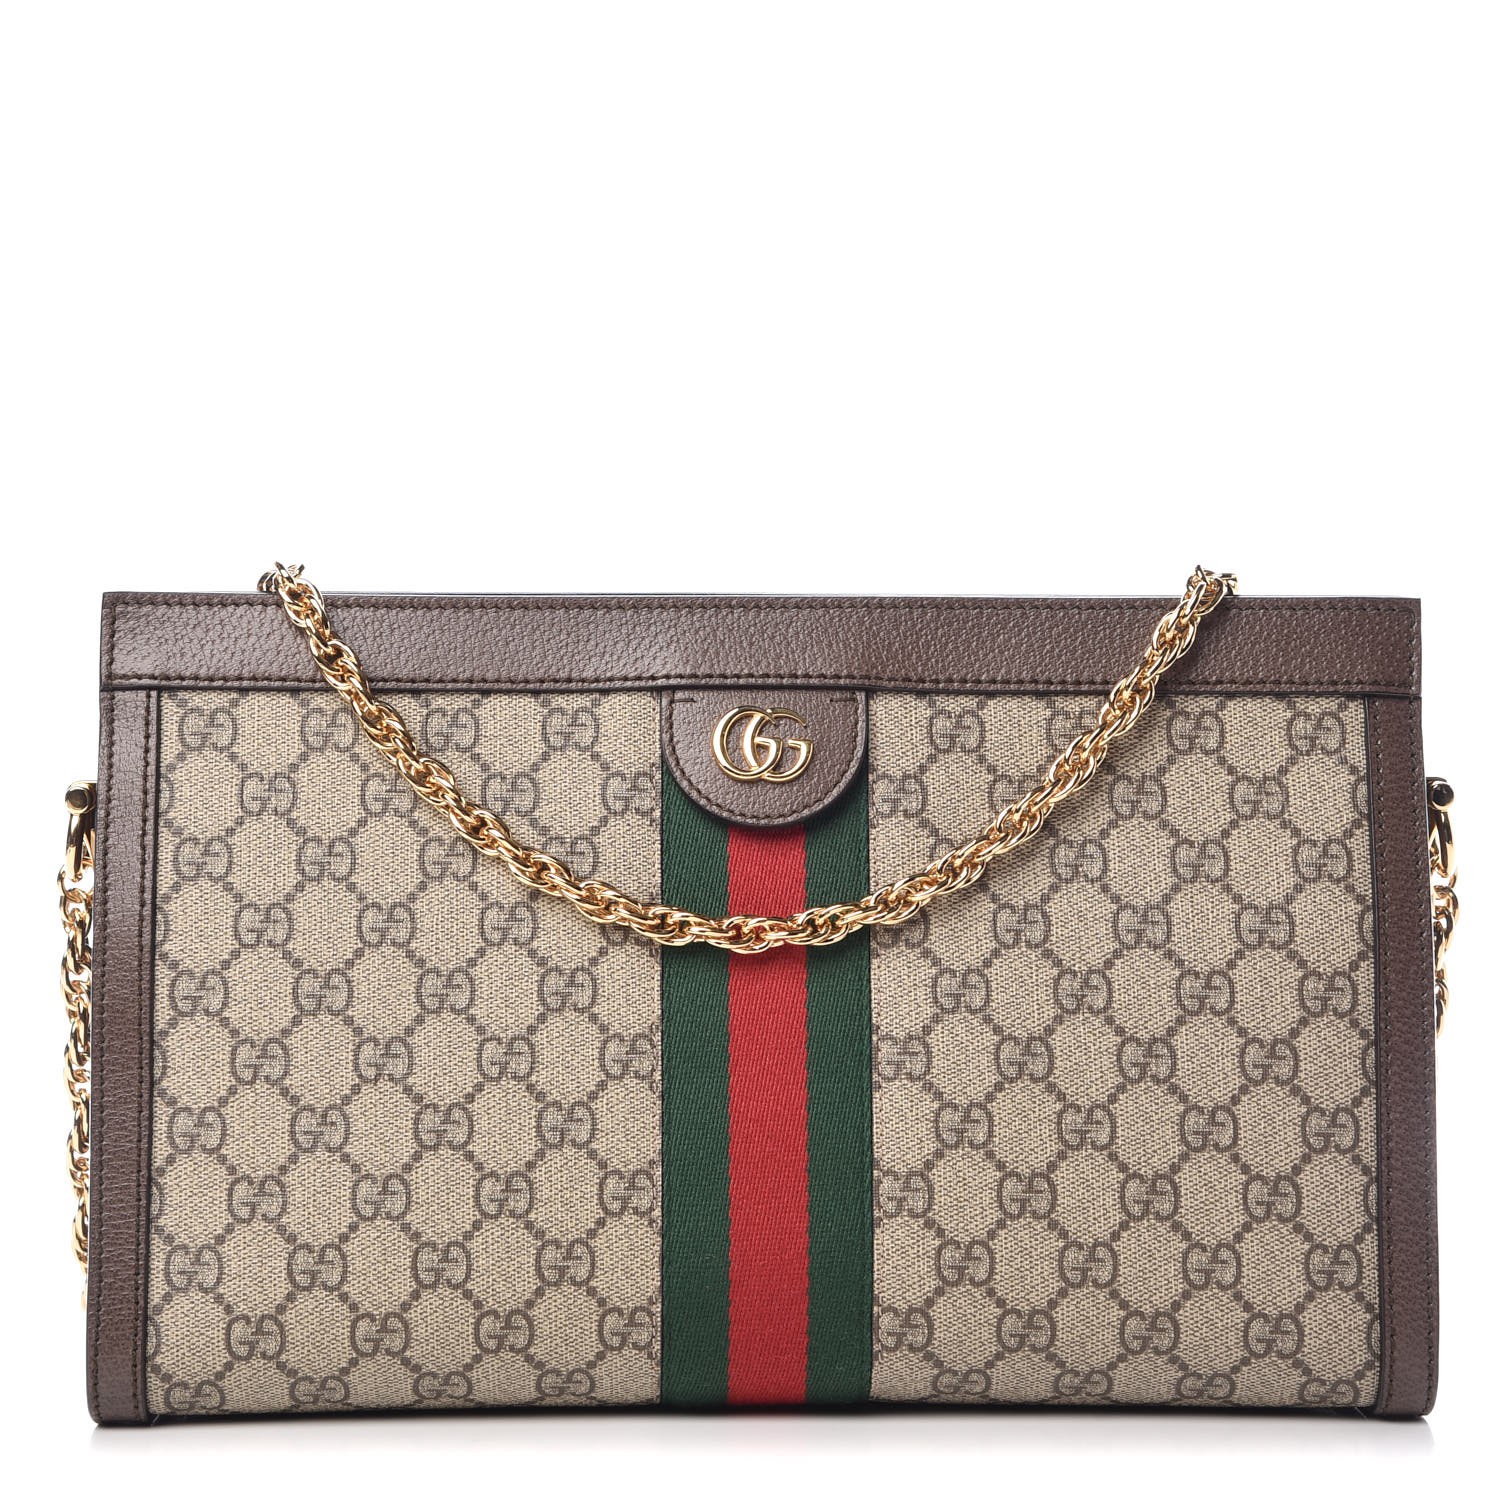 Gucci Ophidia Gg Medium Shoulder Bag Reviewed | IUCN Water